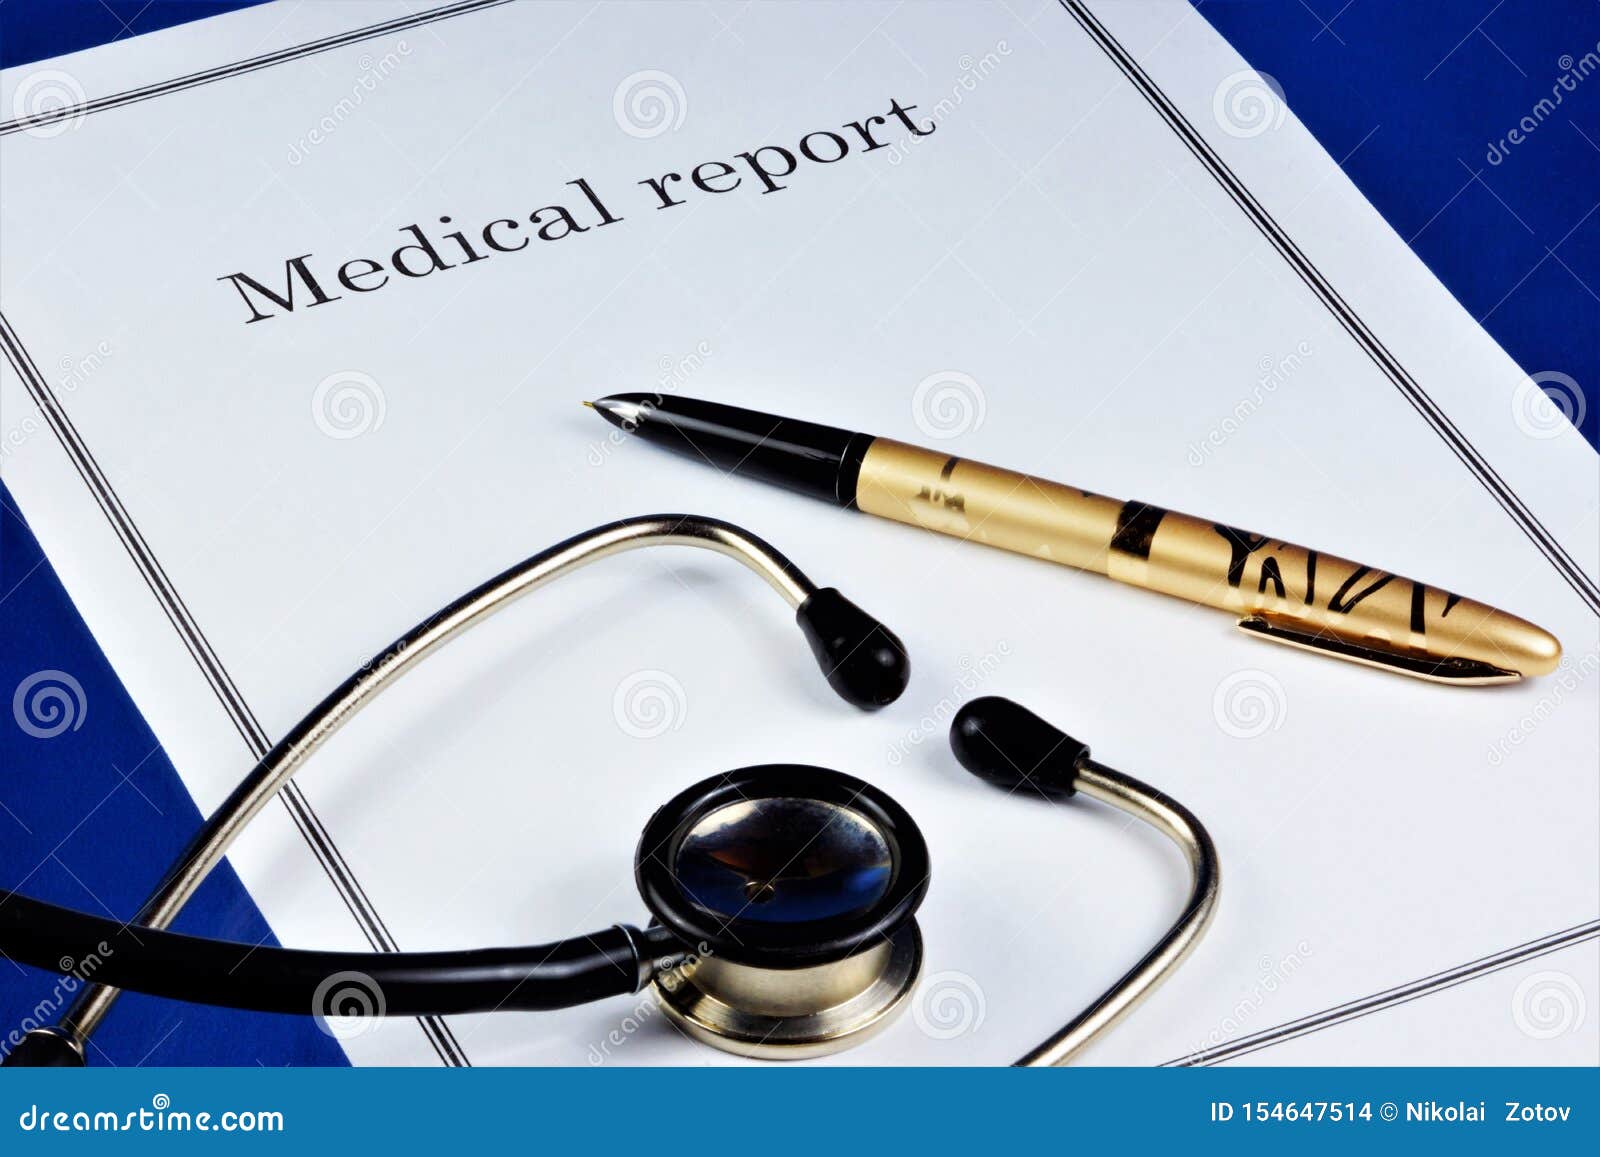 medical report on the state of health of the examined patient. diagnosisÃ¢â¬â the essence of the disease in medical terms and based